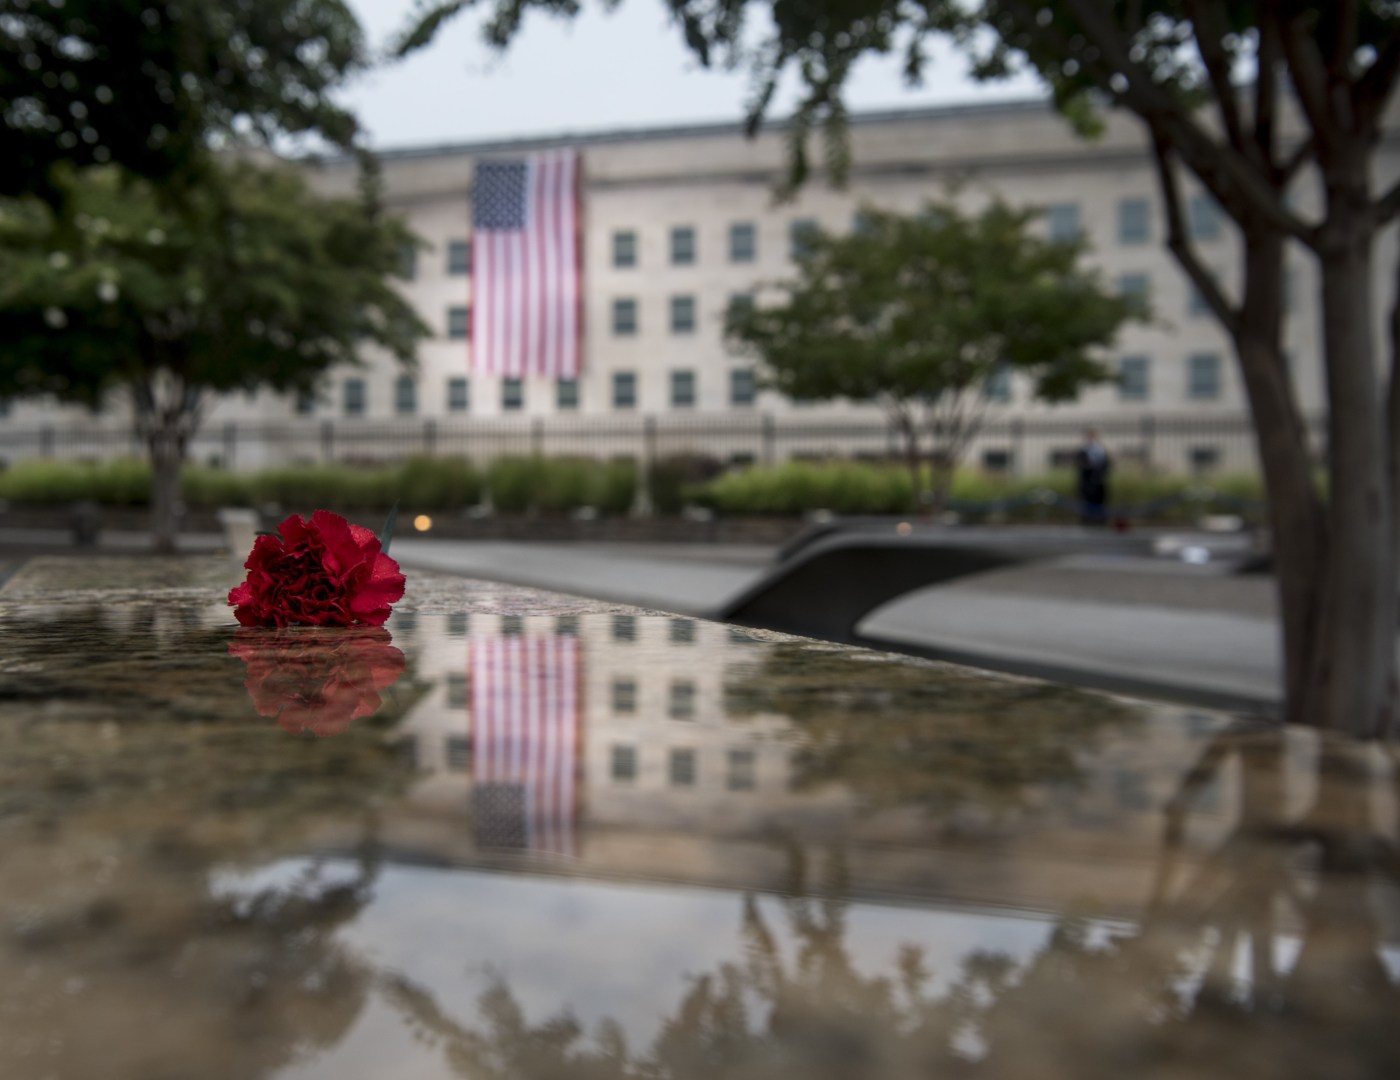 A red flower sits atop of every bench to remember the fallen on Sept. 11, 2001.